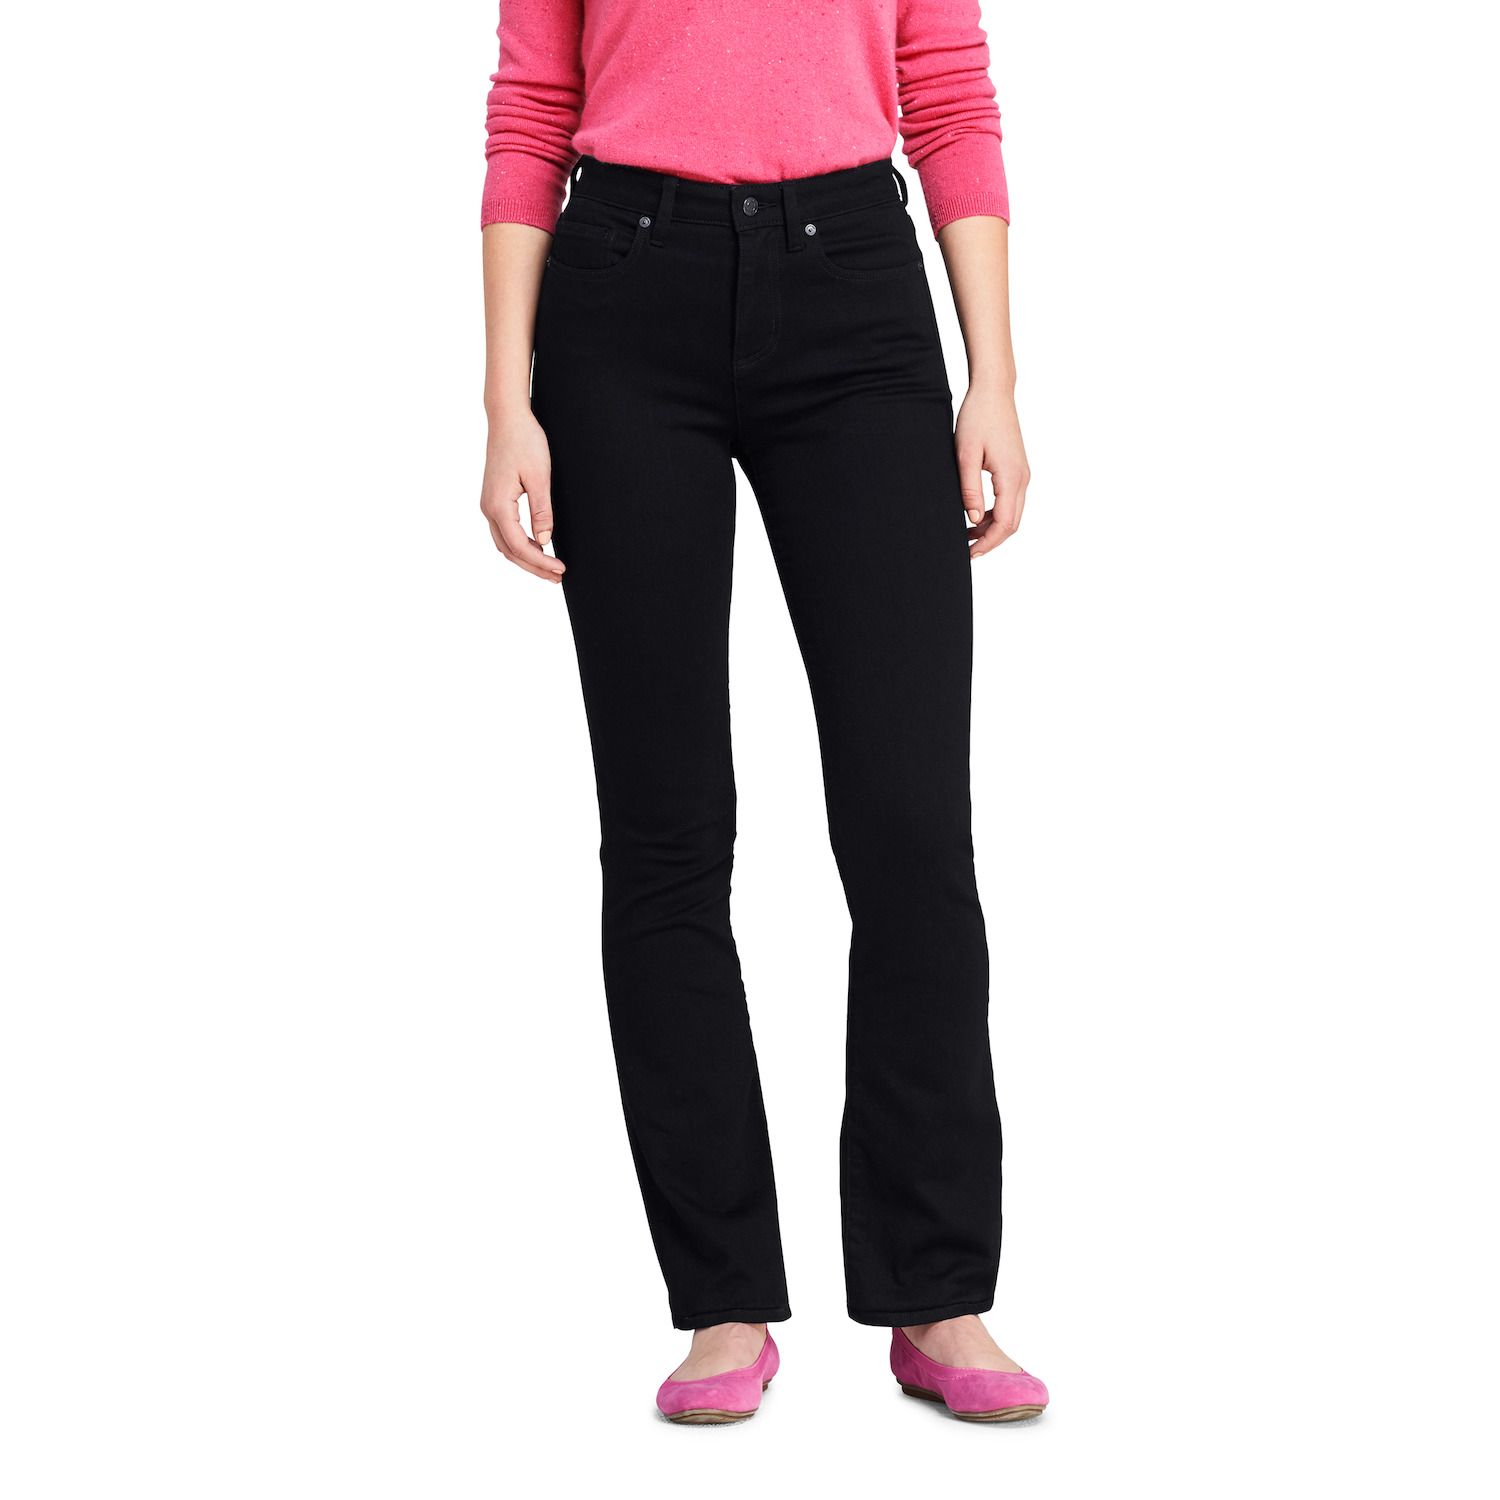 Image for Lands' End Women's Midrise Curvy Fit Bootcut Jeans at Kohl's.